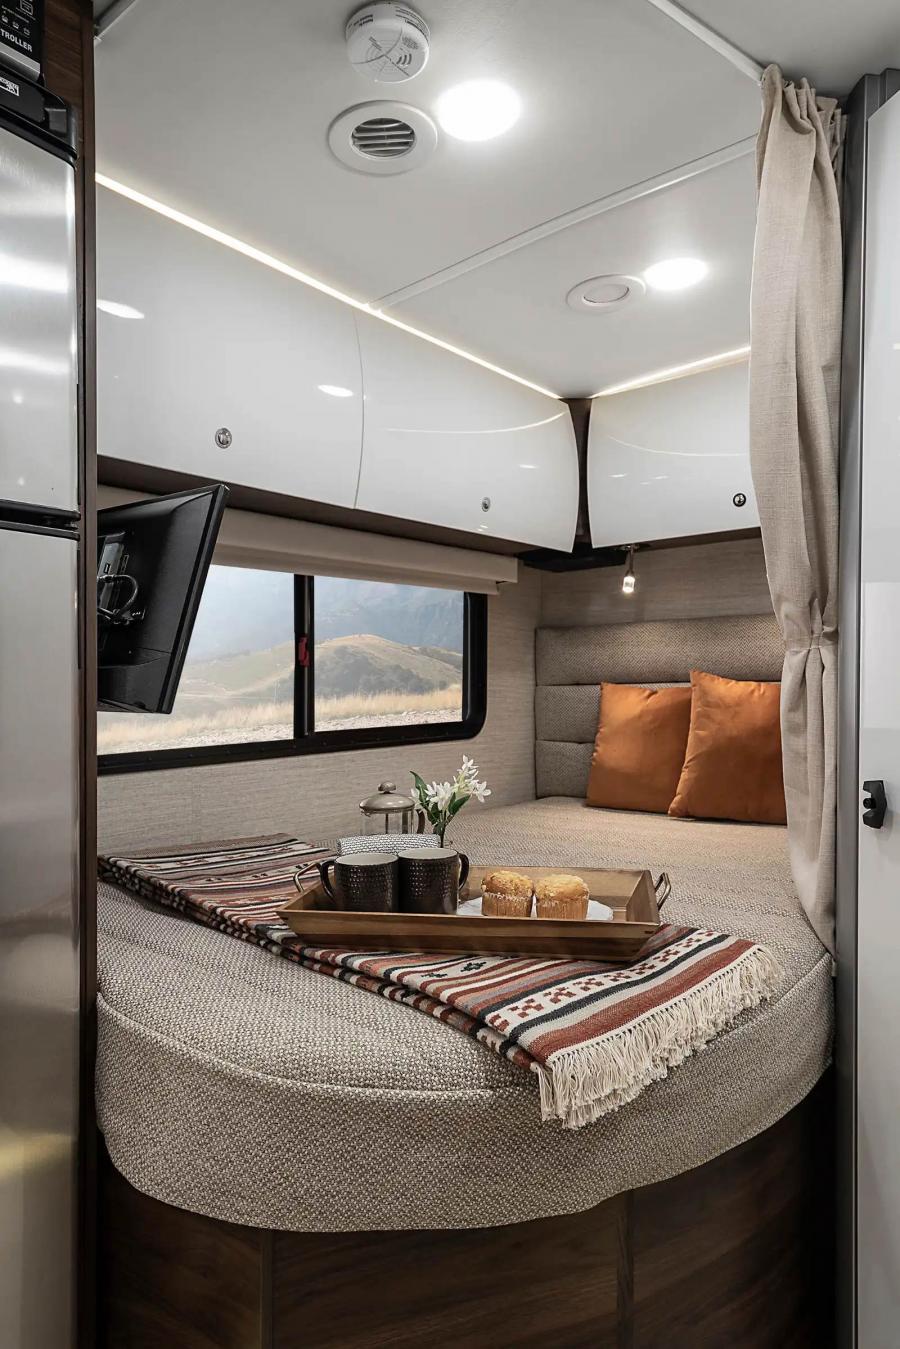 Raised bed space inside an RV with a curtain dividing it